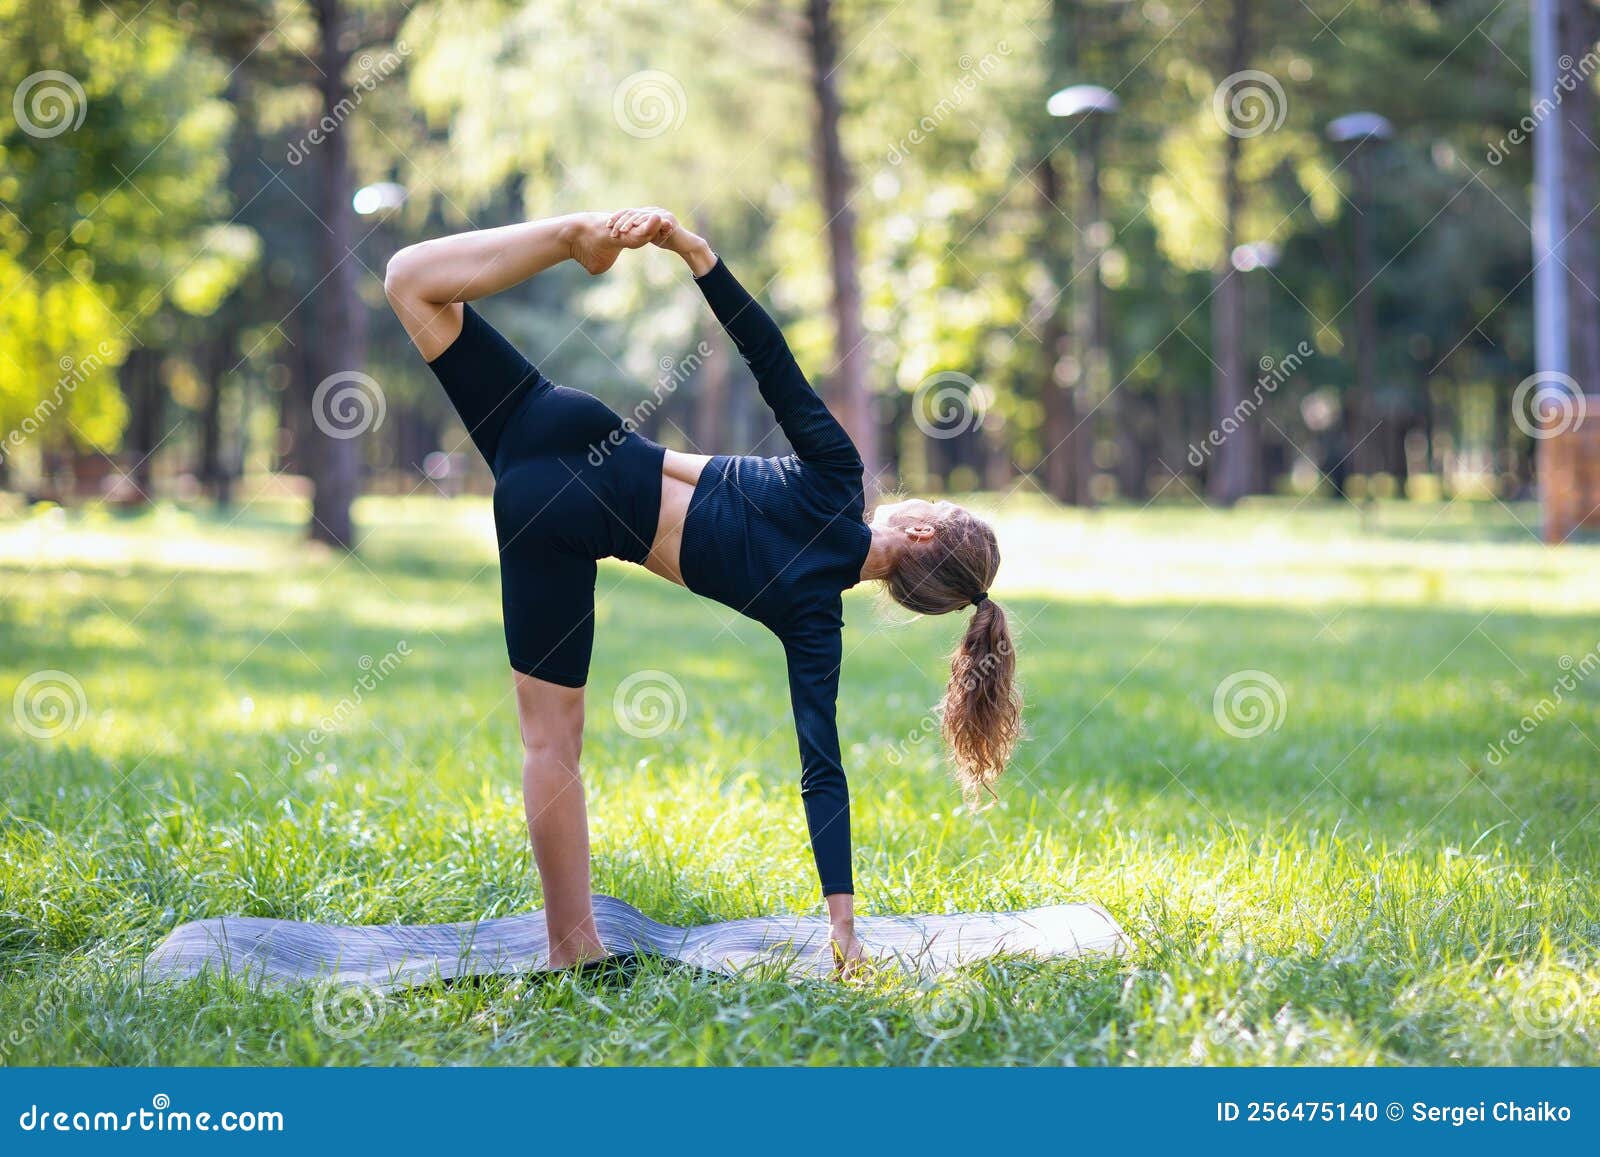 woman yoga practitioner performs variation ardha chandrasana exercise crescent pose trains park warm summer morning standing 256475140